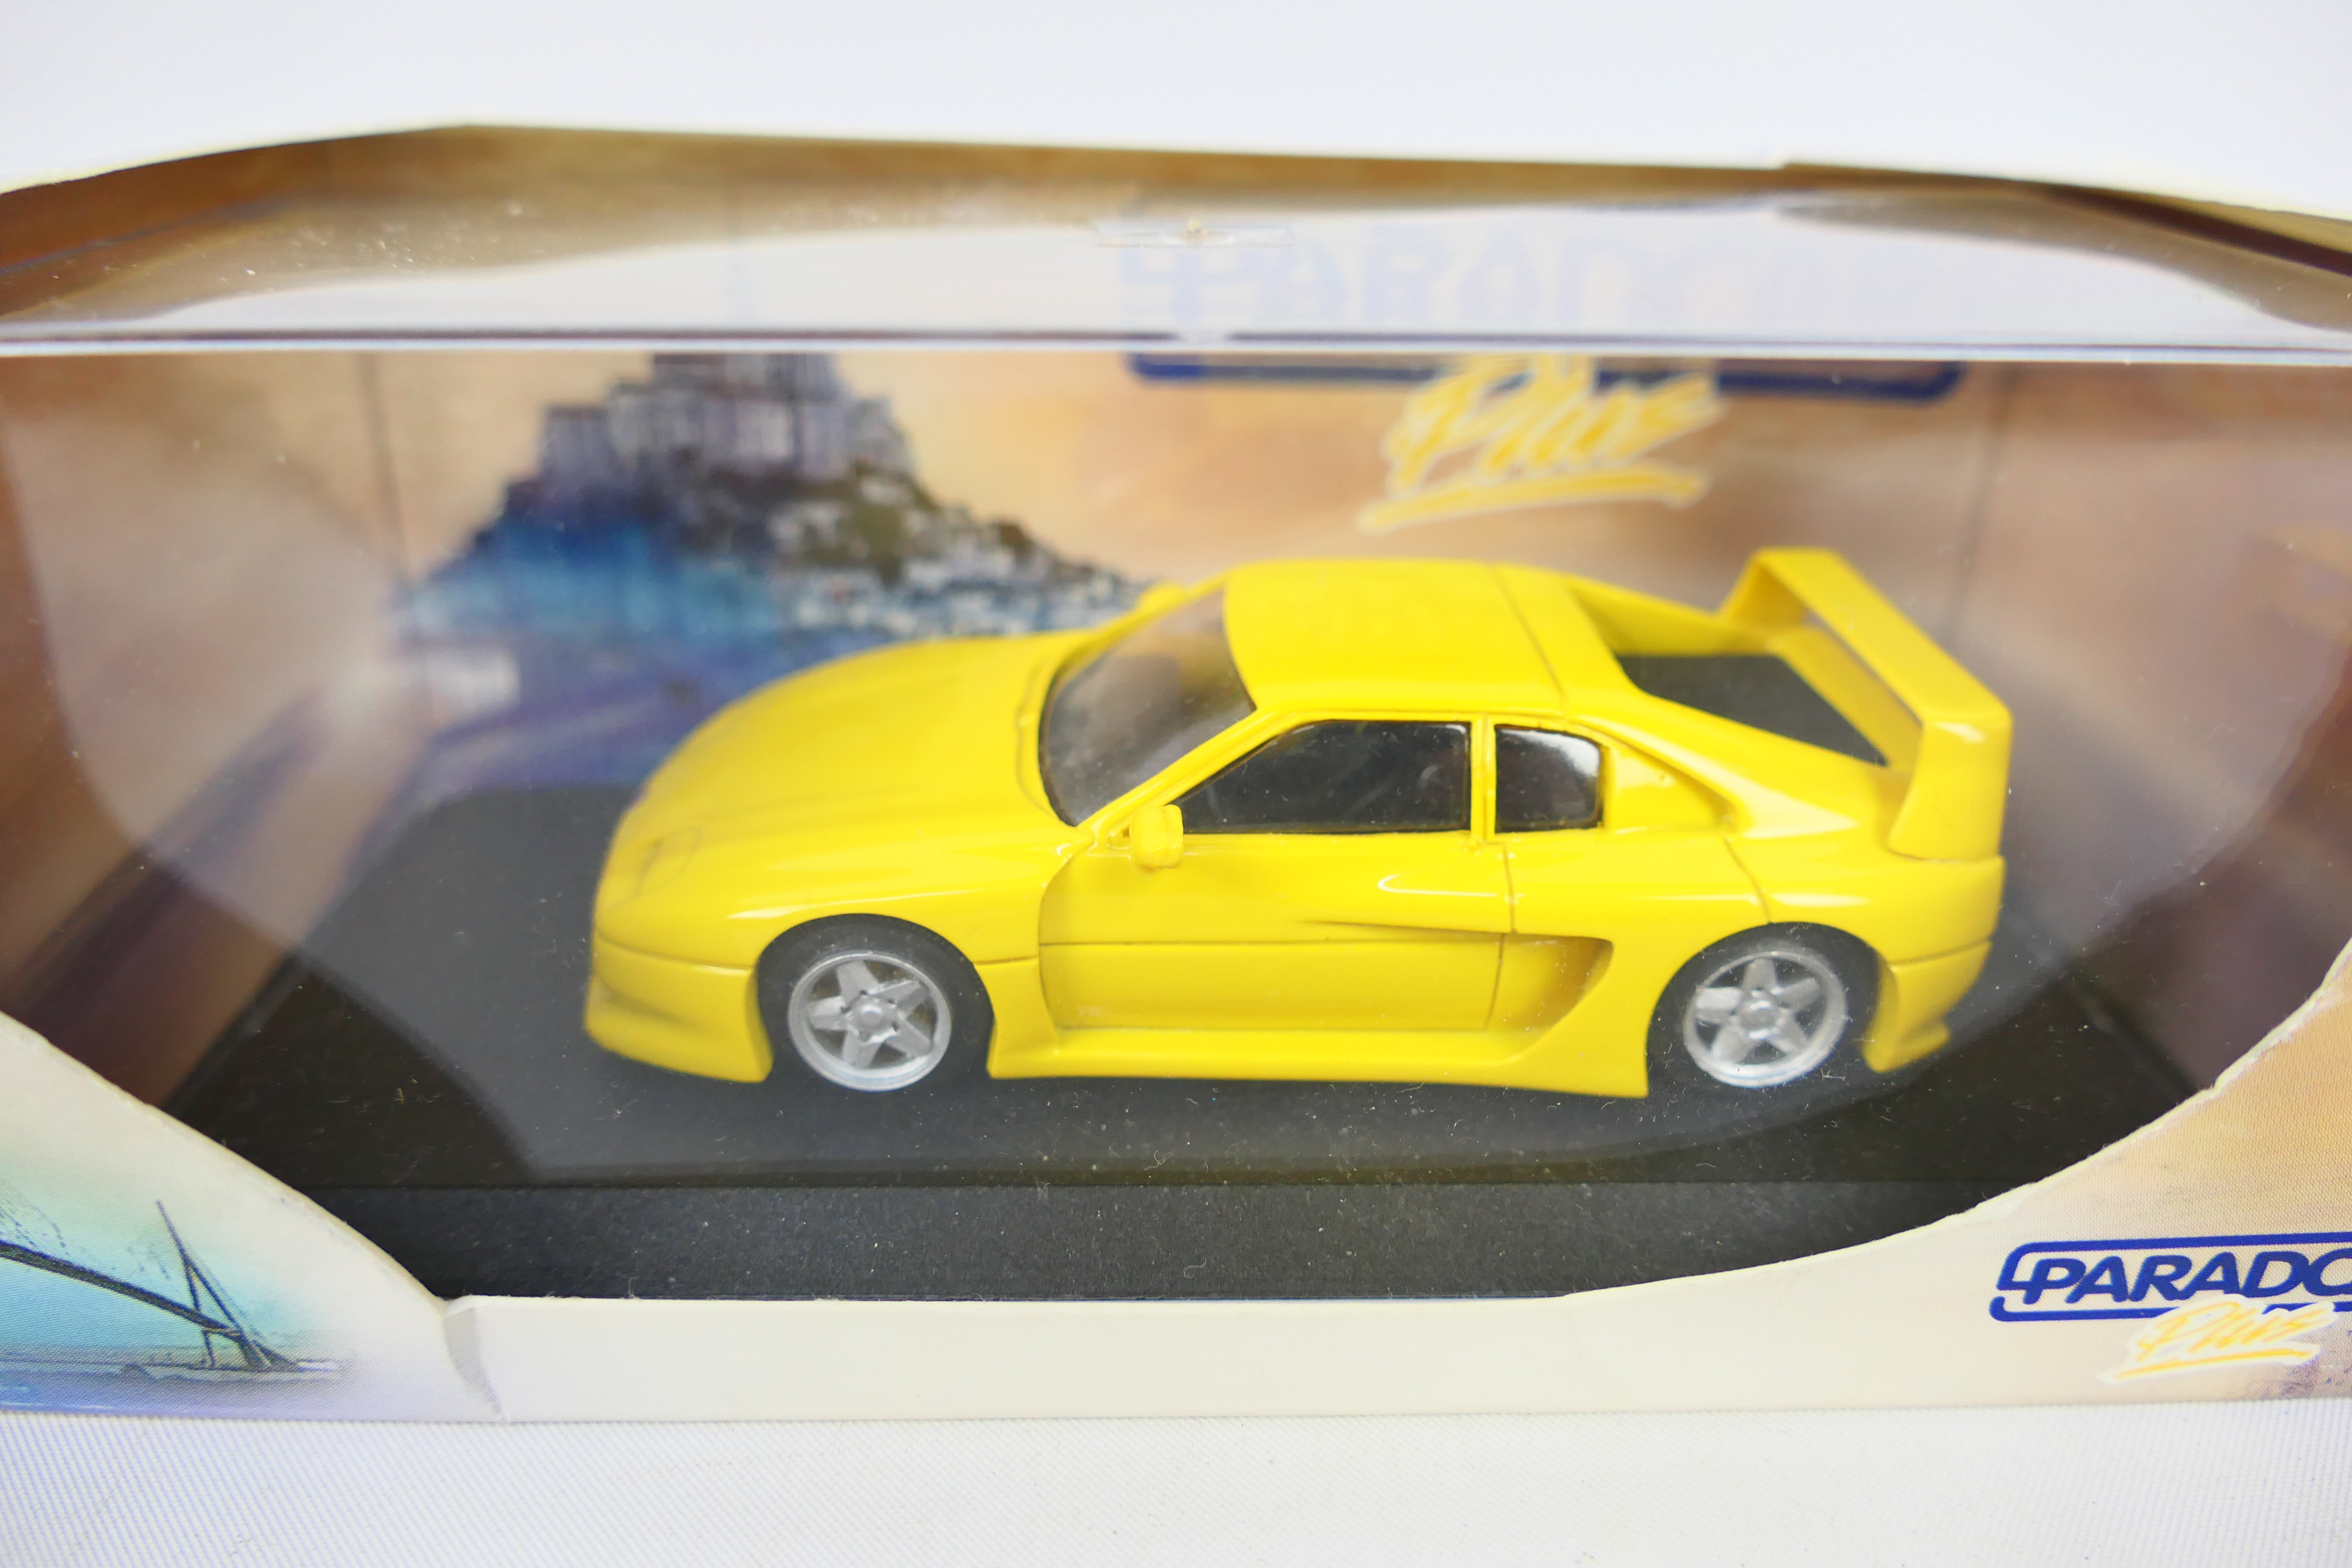 Paradcar - 2 x rare French Venturi models in 1:43 scale resin, - Image 6 of 10